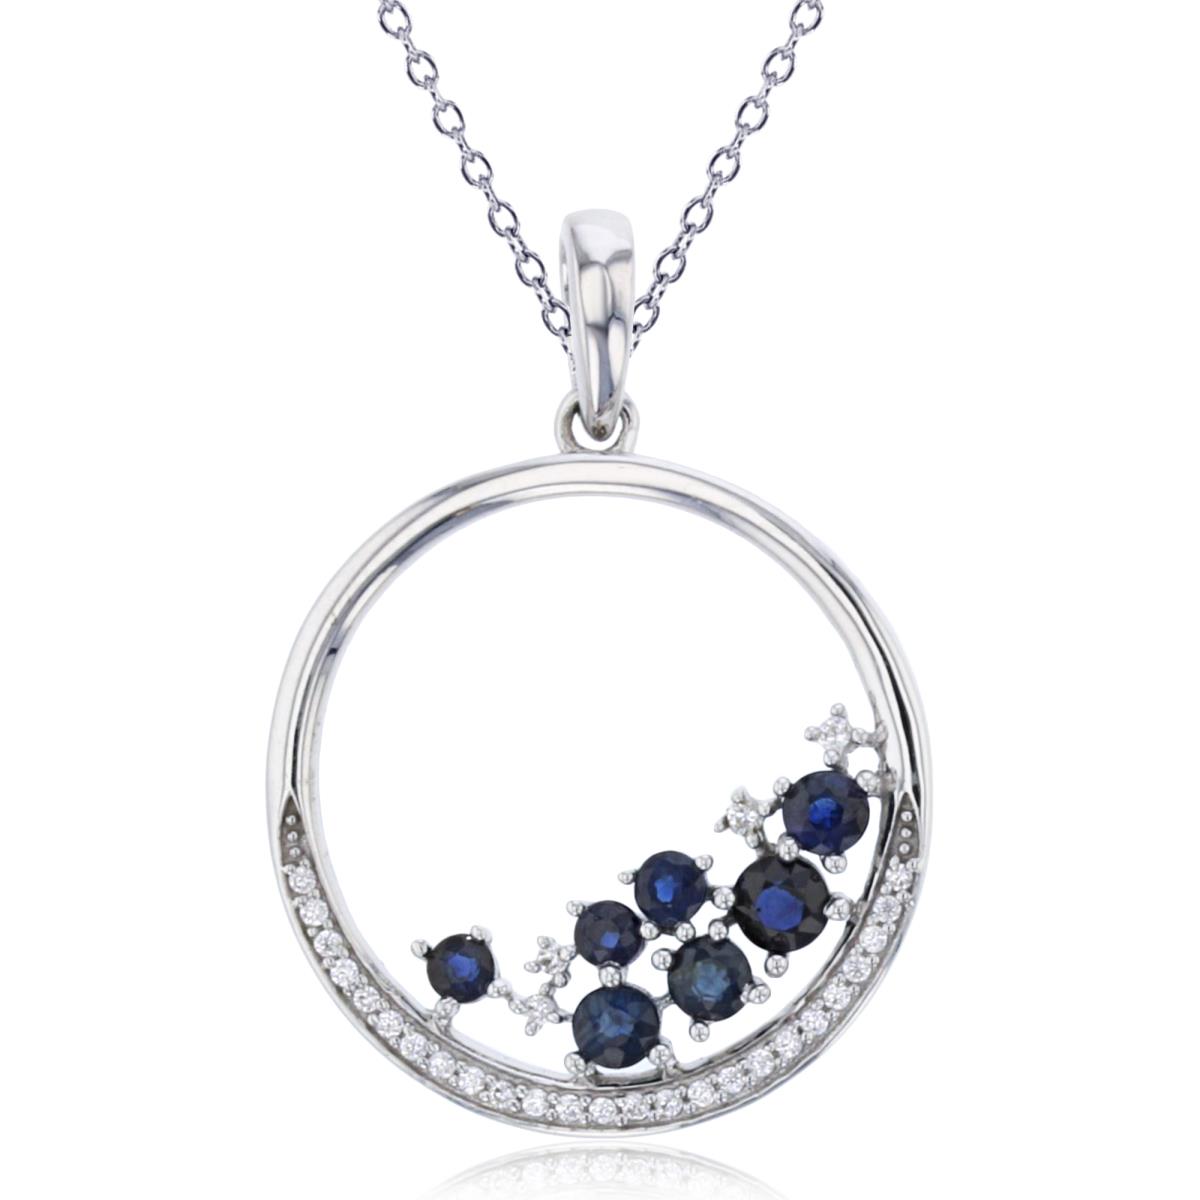 14K White Gold 0.10CTTW Rnd Diamonds & Rnd Sapphire Scattered Open Circle 18"Necklace